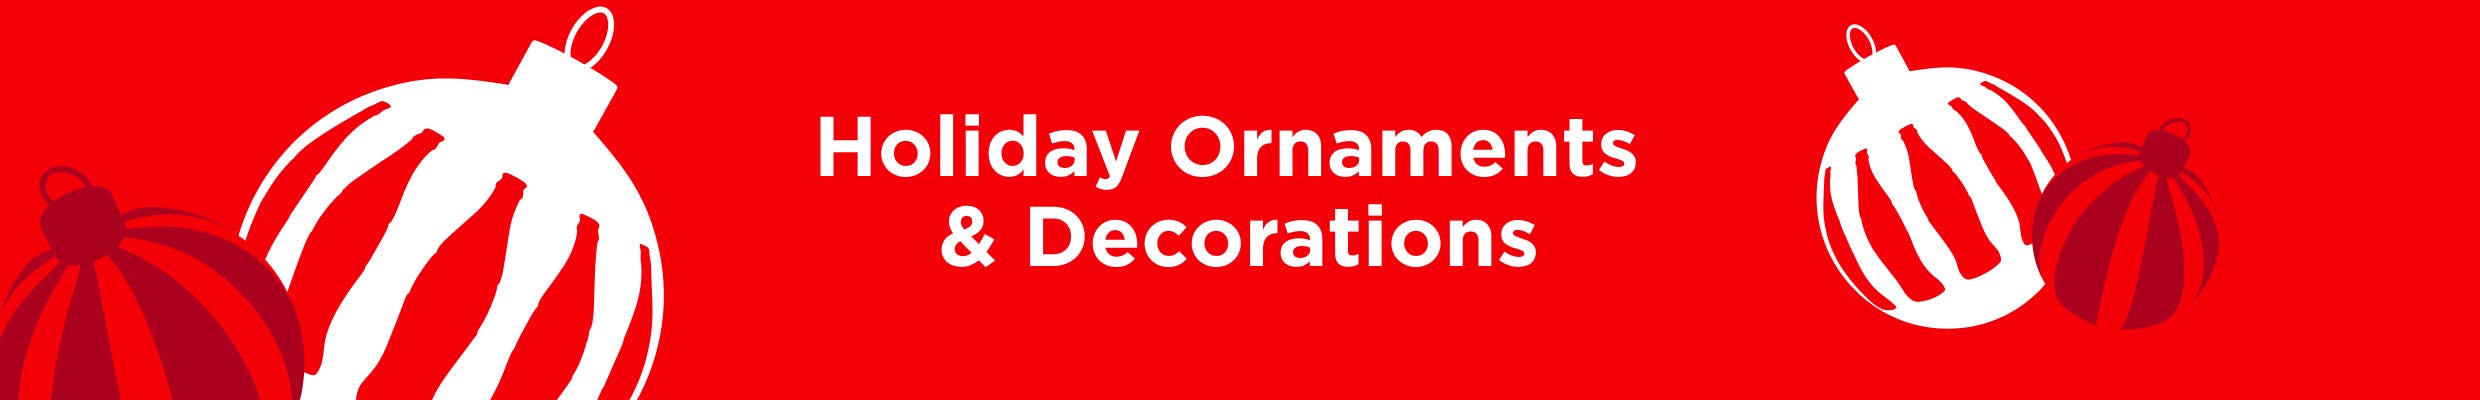 Holiday Ornaments & Decorations 